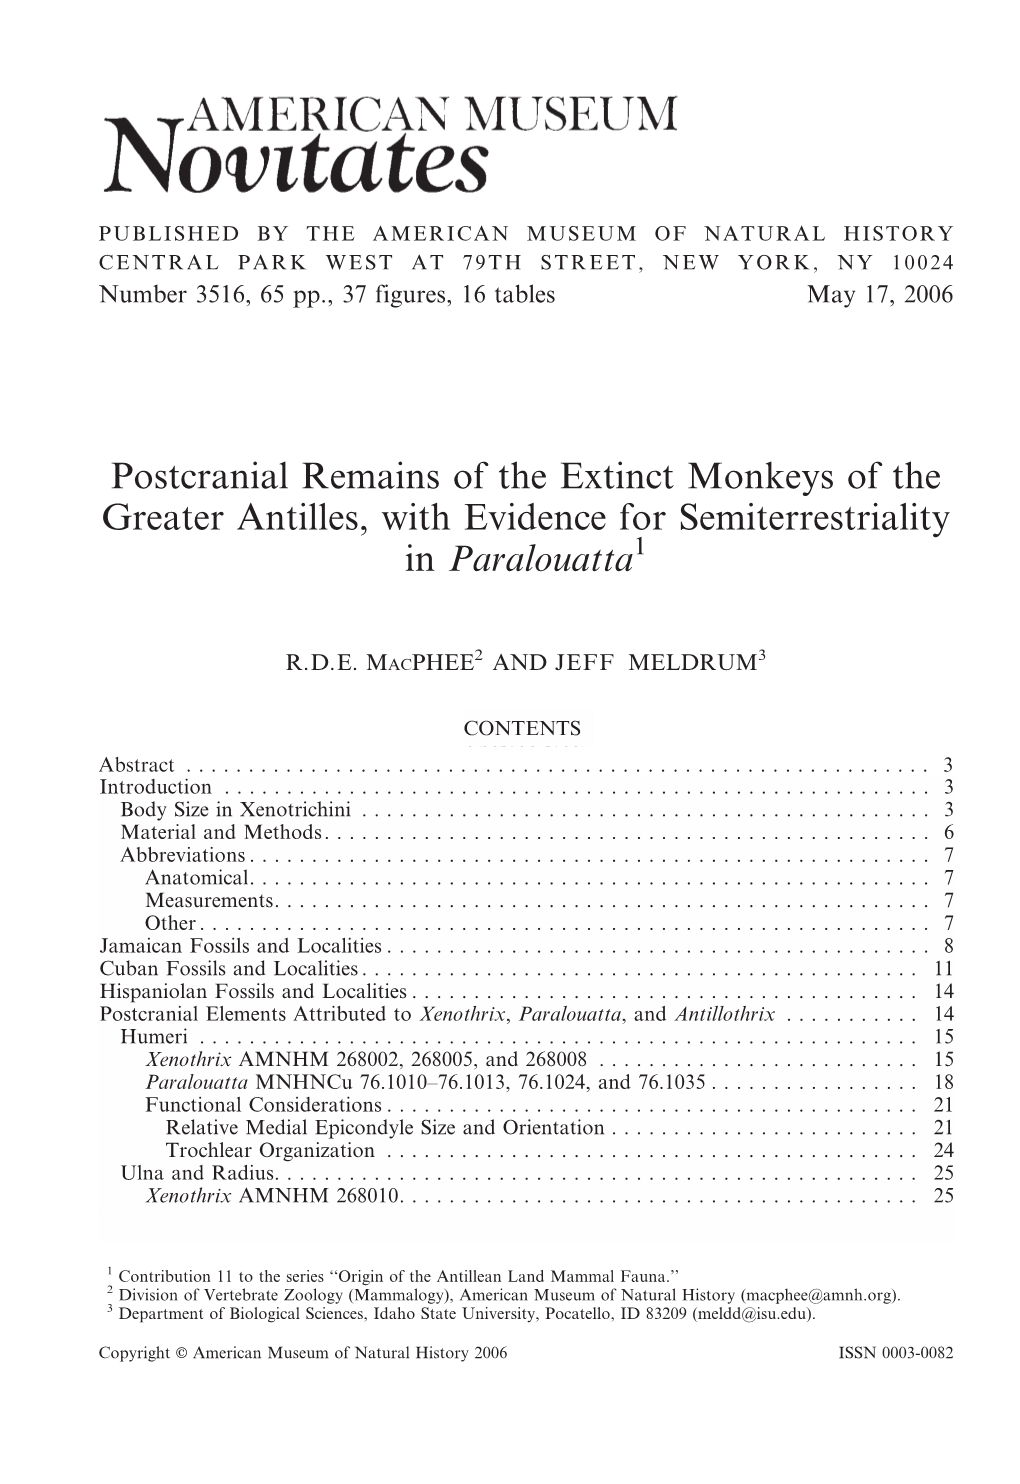 Postcranial Remains of the Extinct Monkeys of the Greater Antilles, with Evidence for Semiterrestriality in Paralouatta1